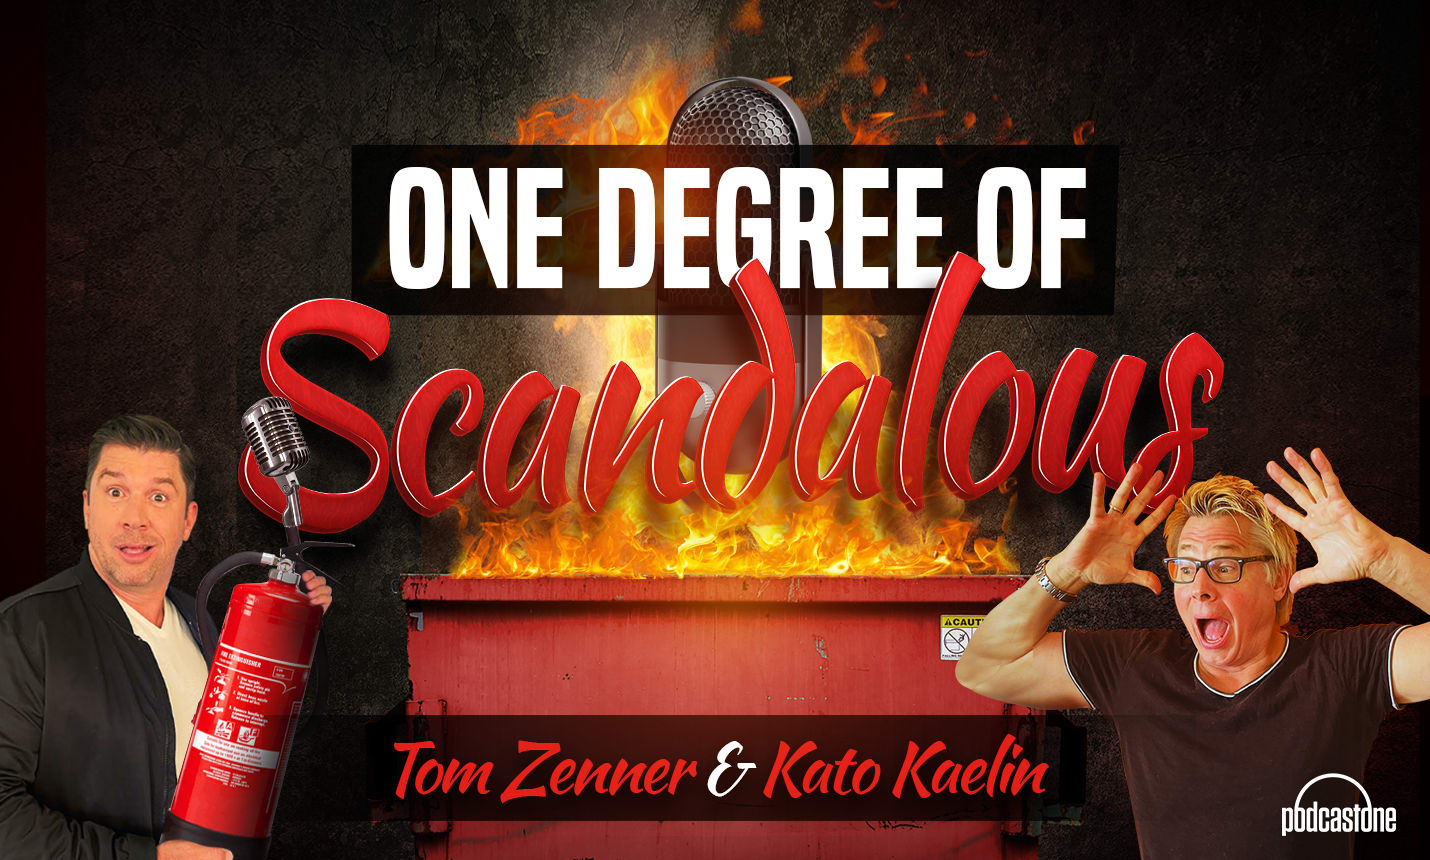 One Degree of Scandalous with Kato Kaelin and Tom Zenner